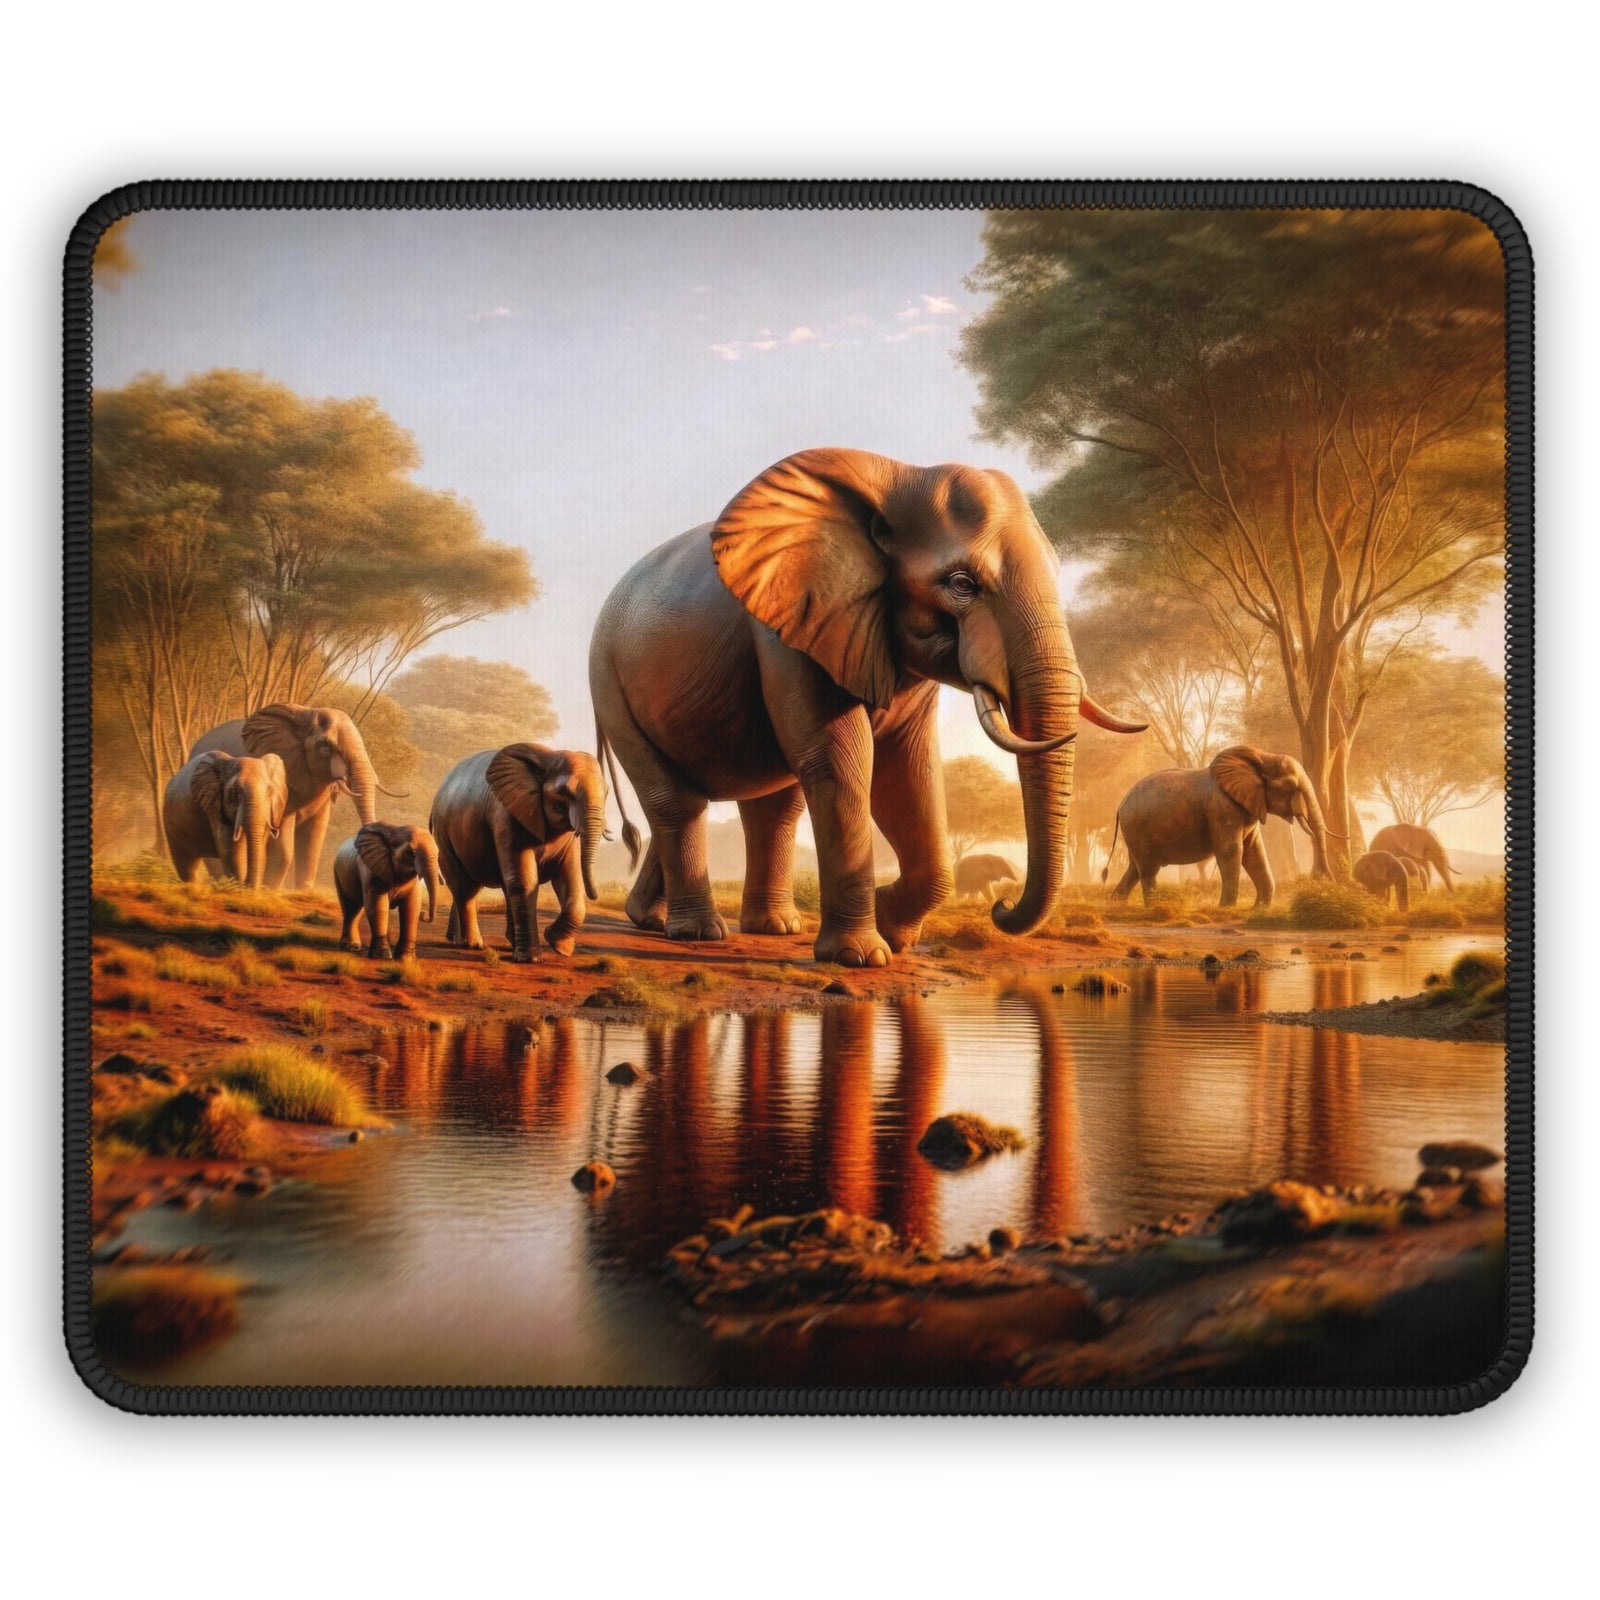 Gentle Giants at Dawn's Embrace Gaming Mouse Pad